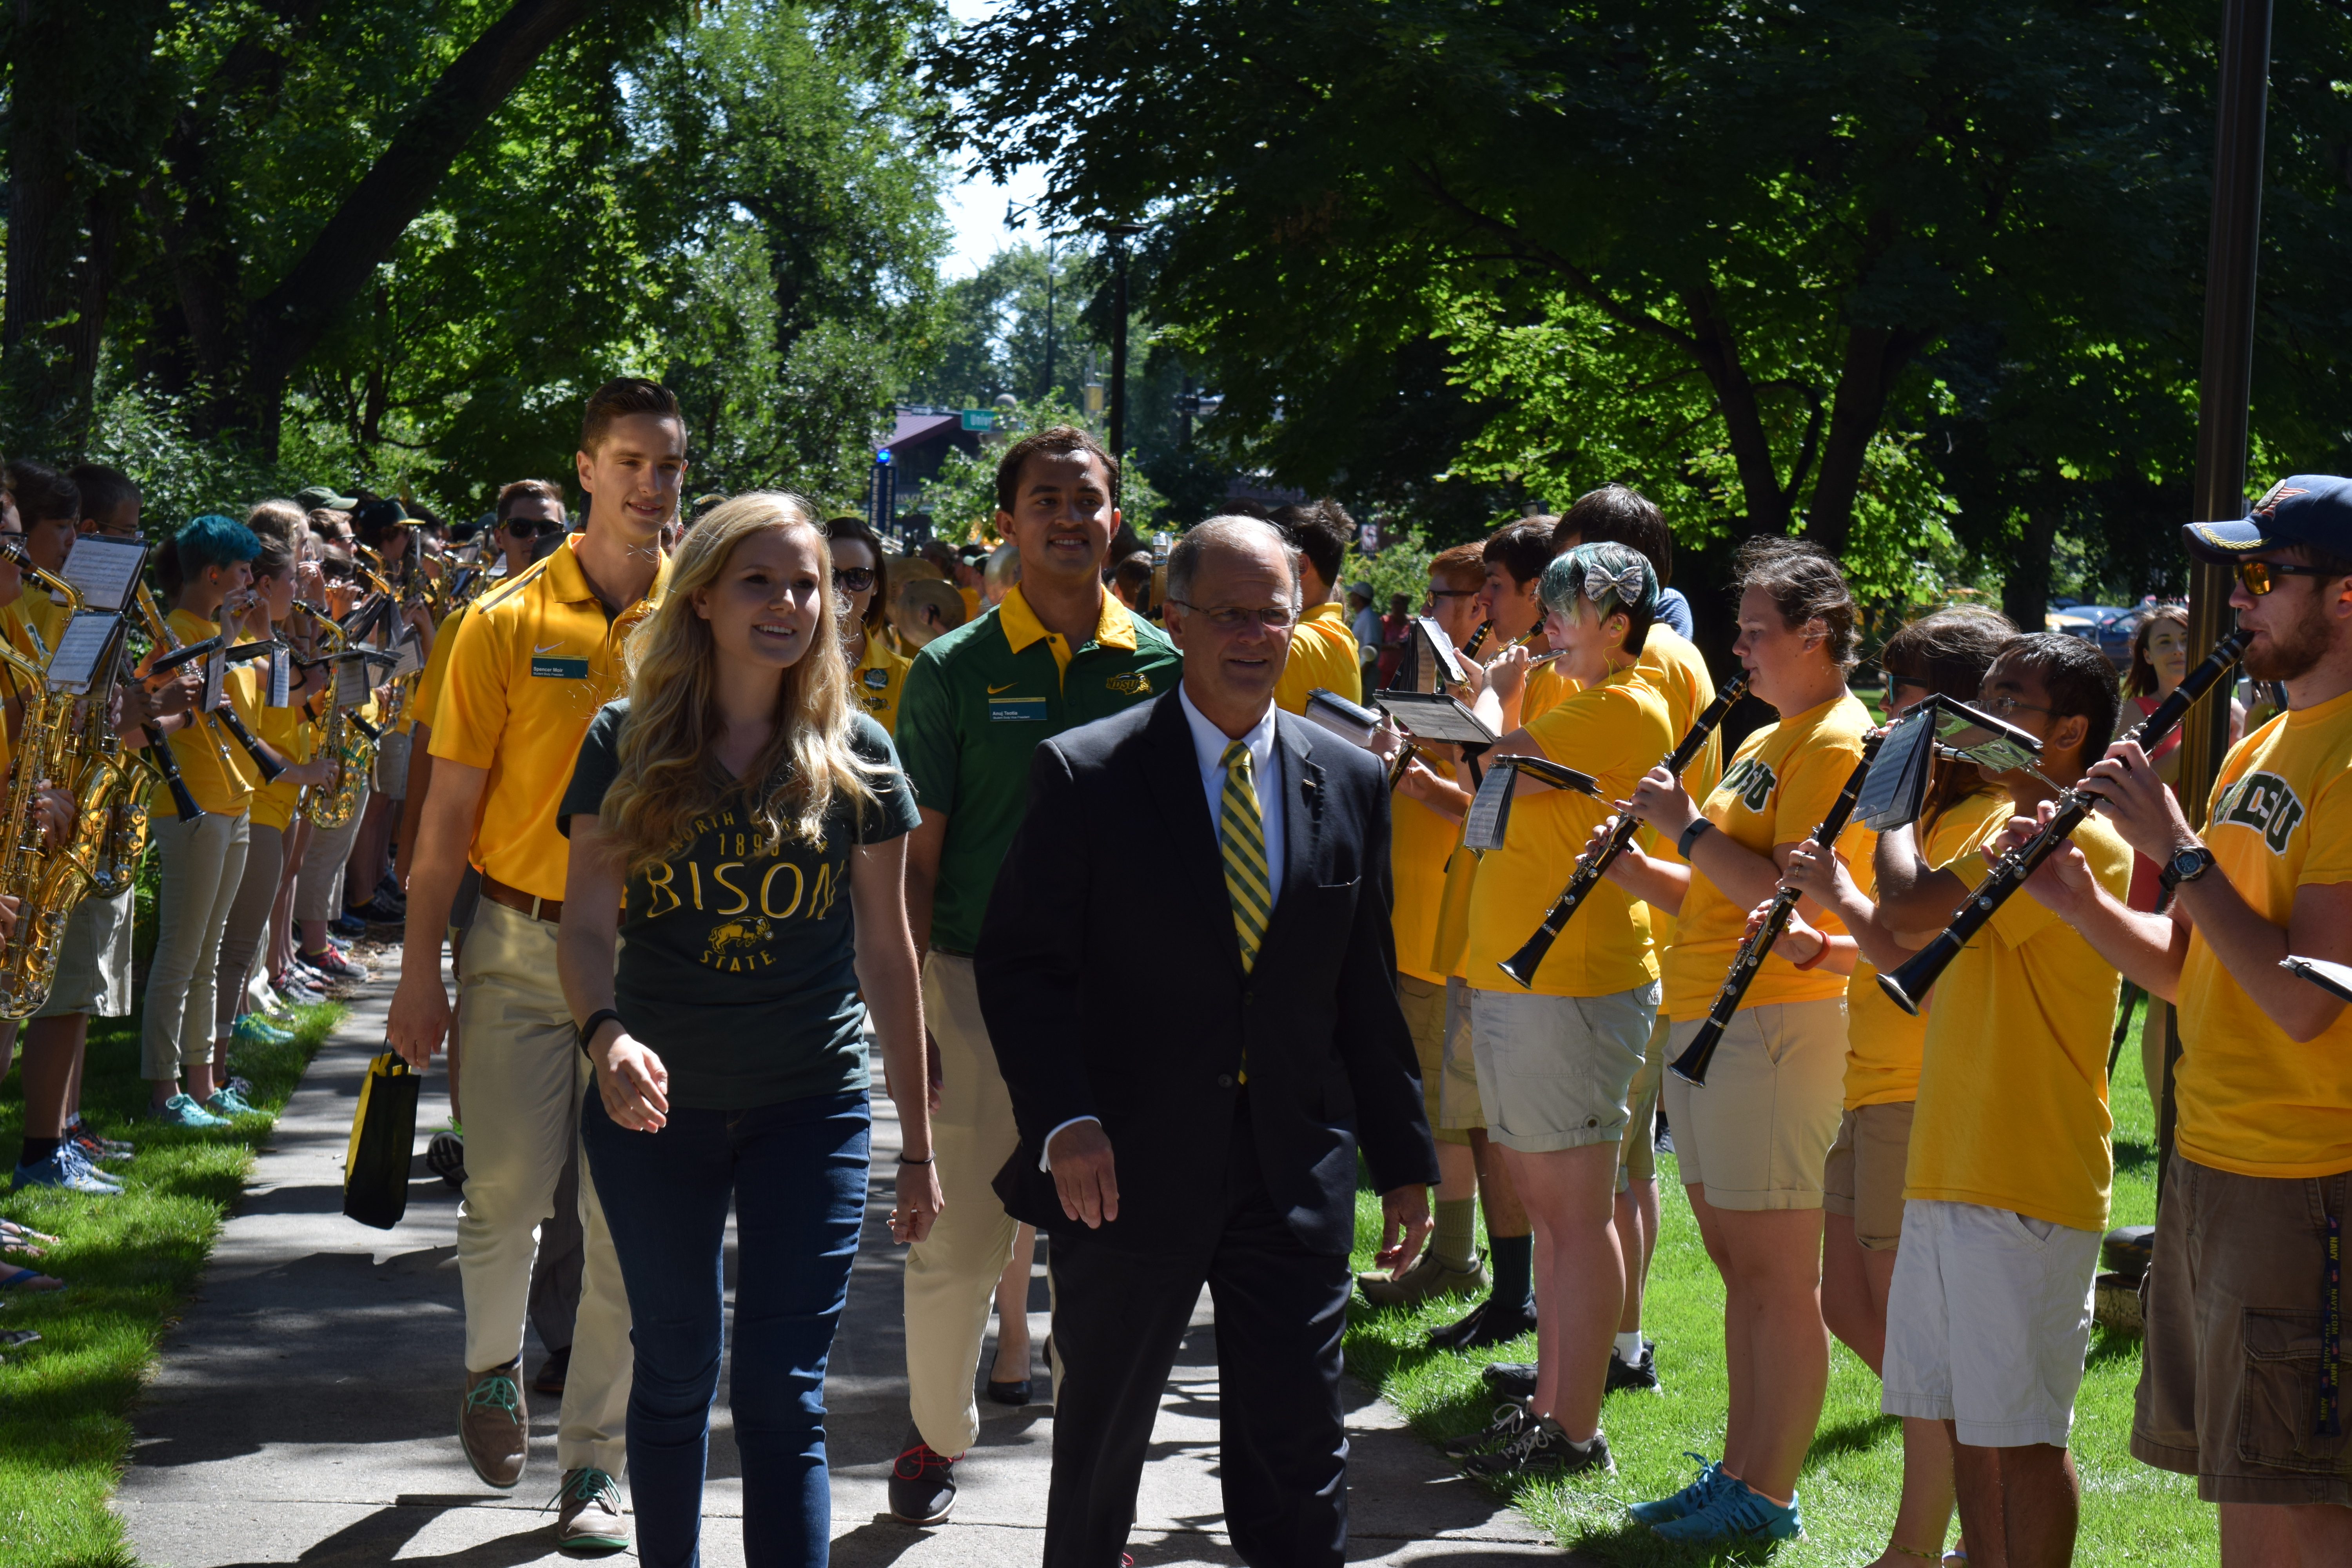 CASEY MCCARTY | THE SPECTRUM President Dean Bresciani leads the class of 2020 through the gates of NDSU.